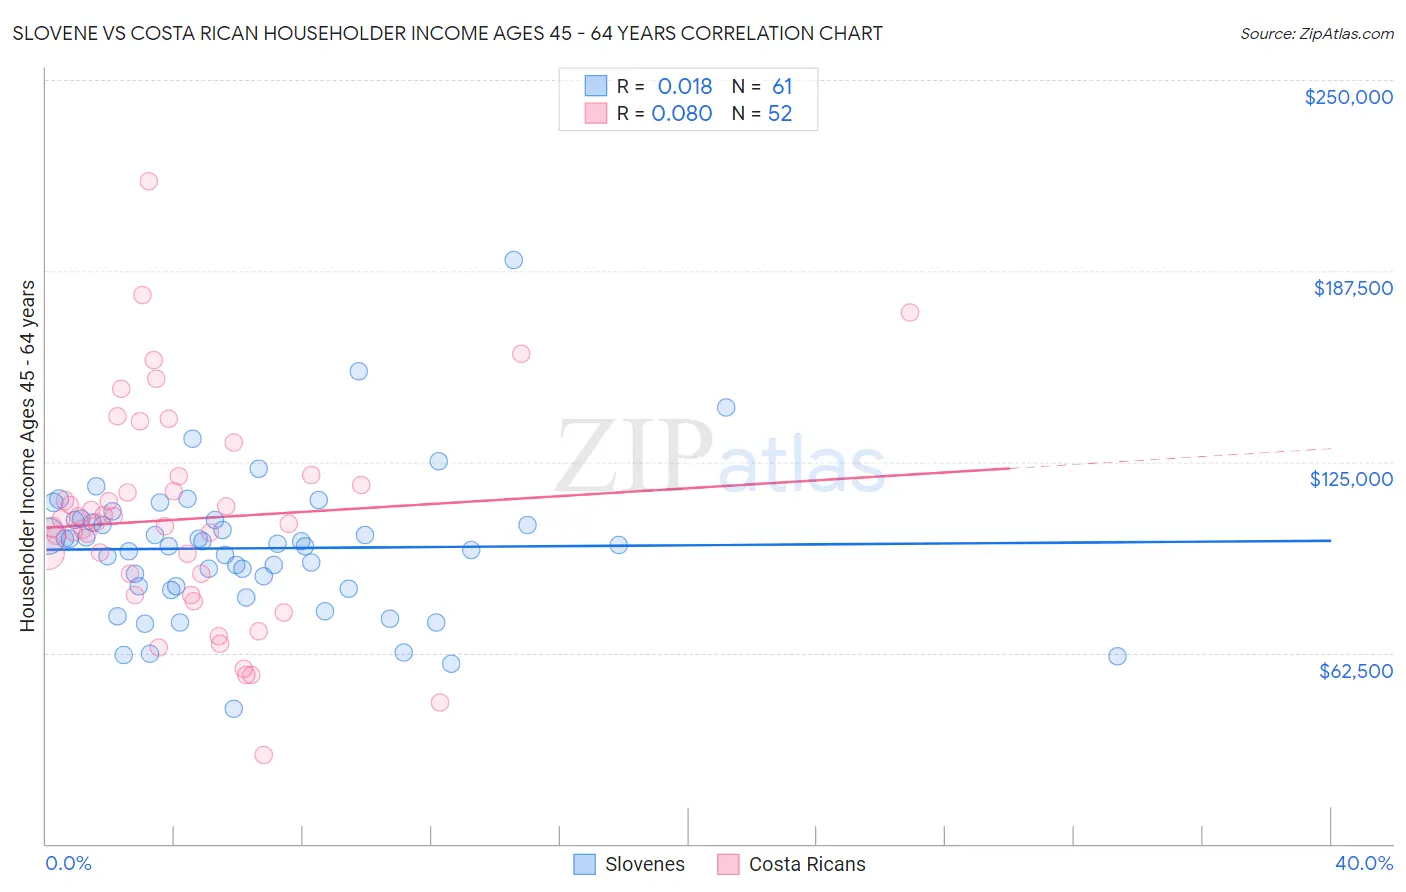 Slovene vs Costa Rican Householder Income Ages 45 - 64 years